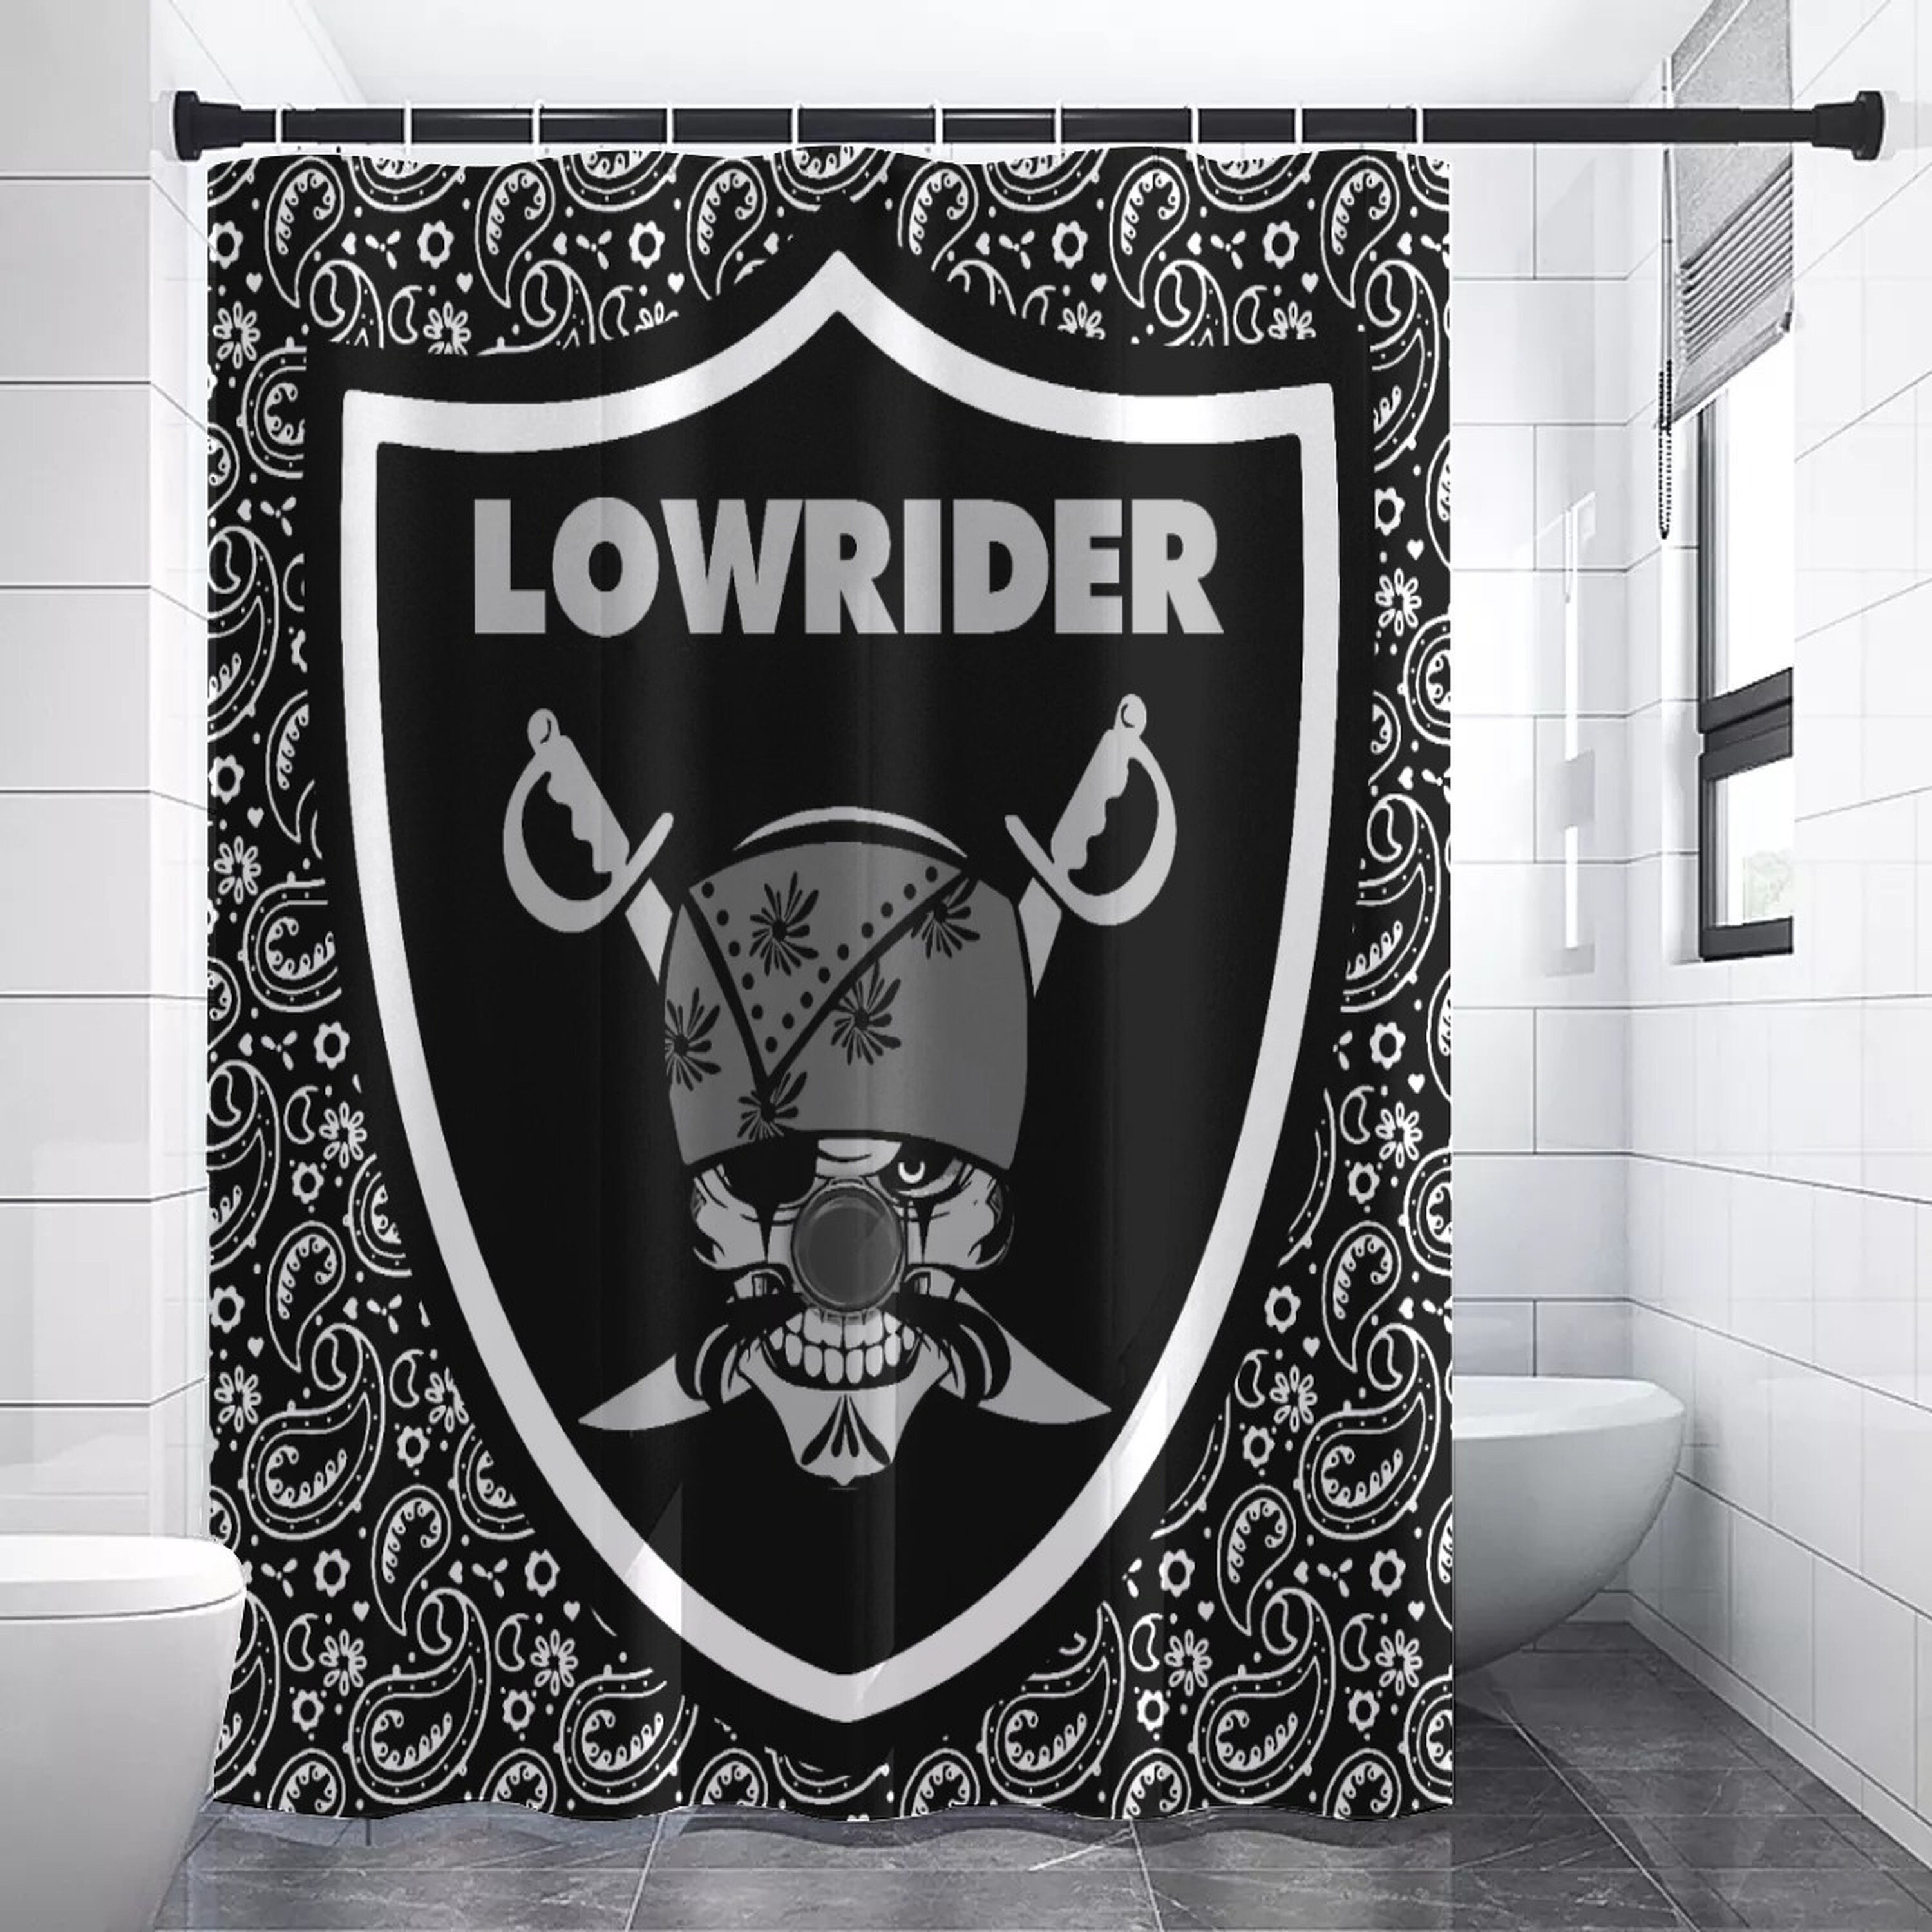 Raider Logo Oakland Grateful Dead Syf Steal Your Face Skull And Lightning  Bolt Shower Curtain By Ho Me Lili With Hooks - Shower Curtains - AliExpress